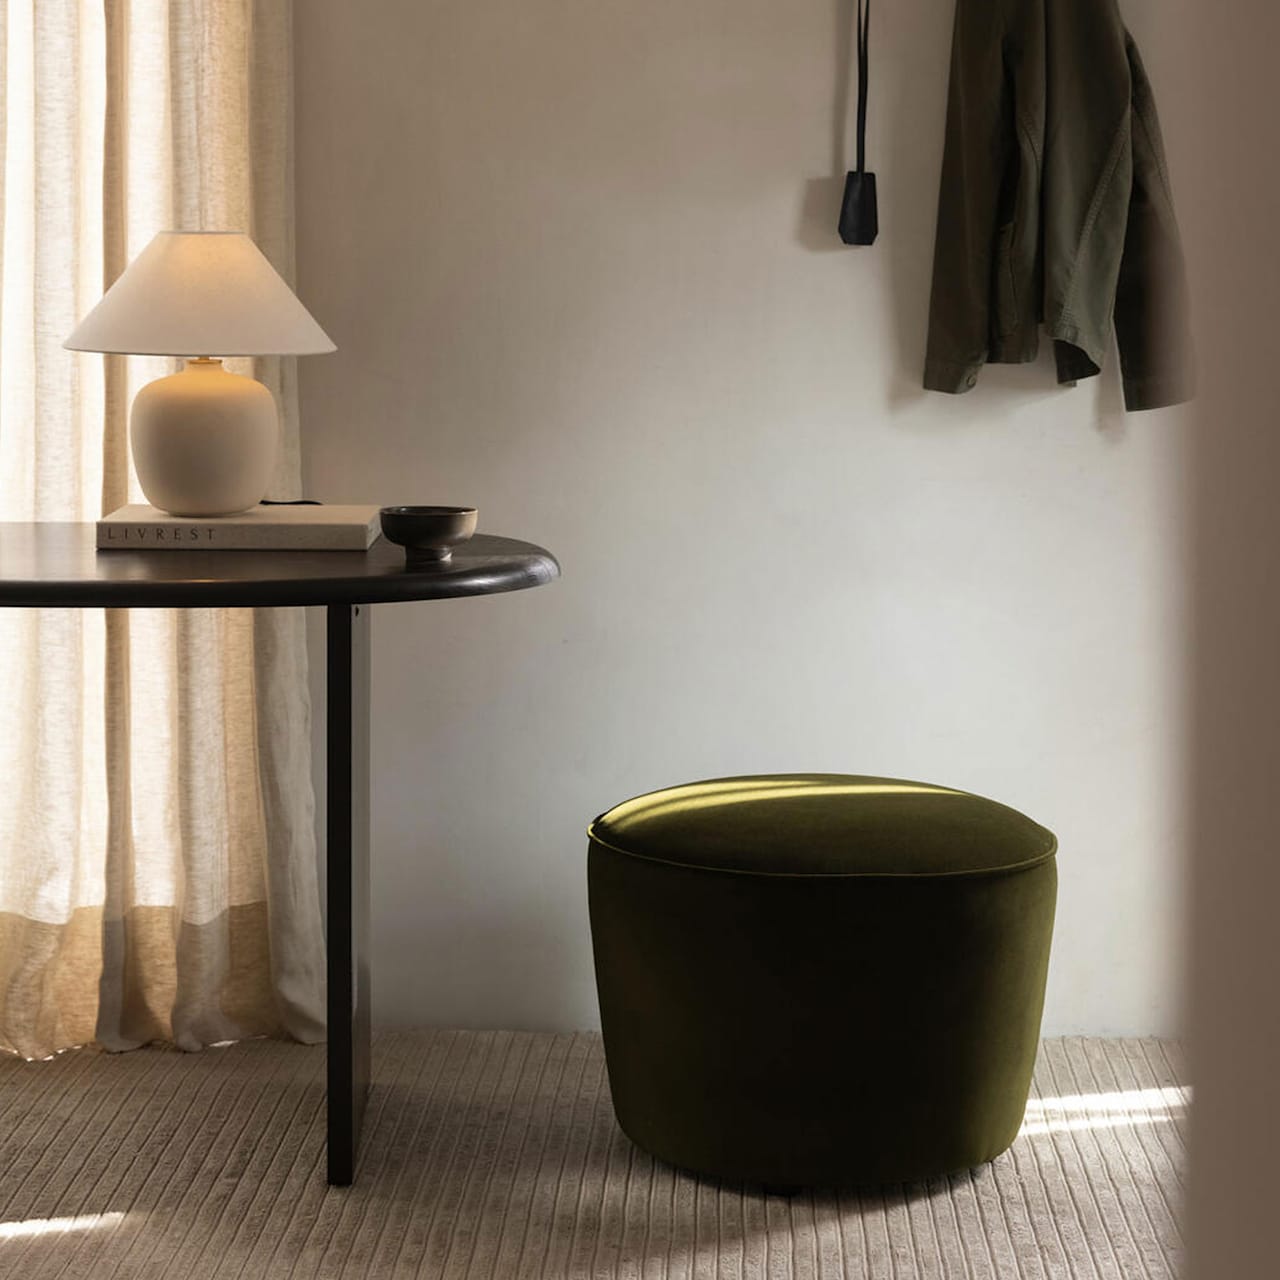 Cairn Pouf Oval